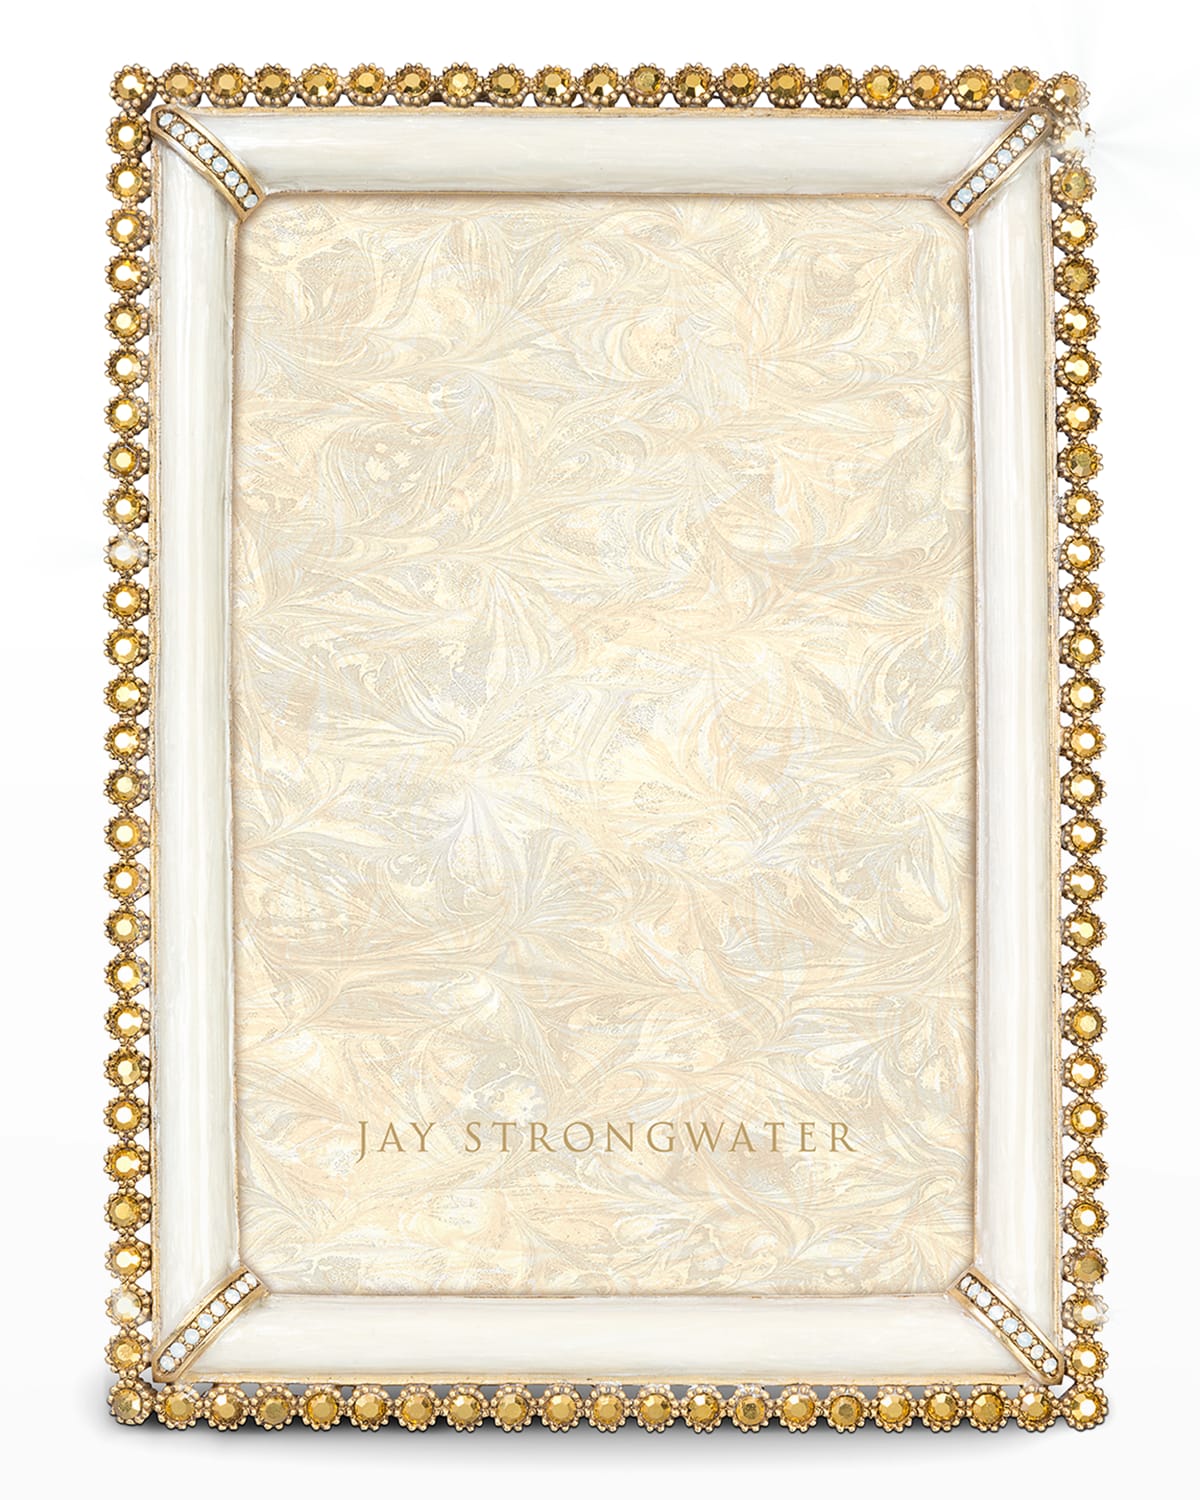 JAY STRONGWATER STONE-EDGE 4" X 6" PICTURE FRAME